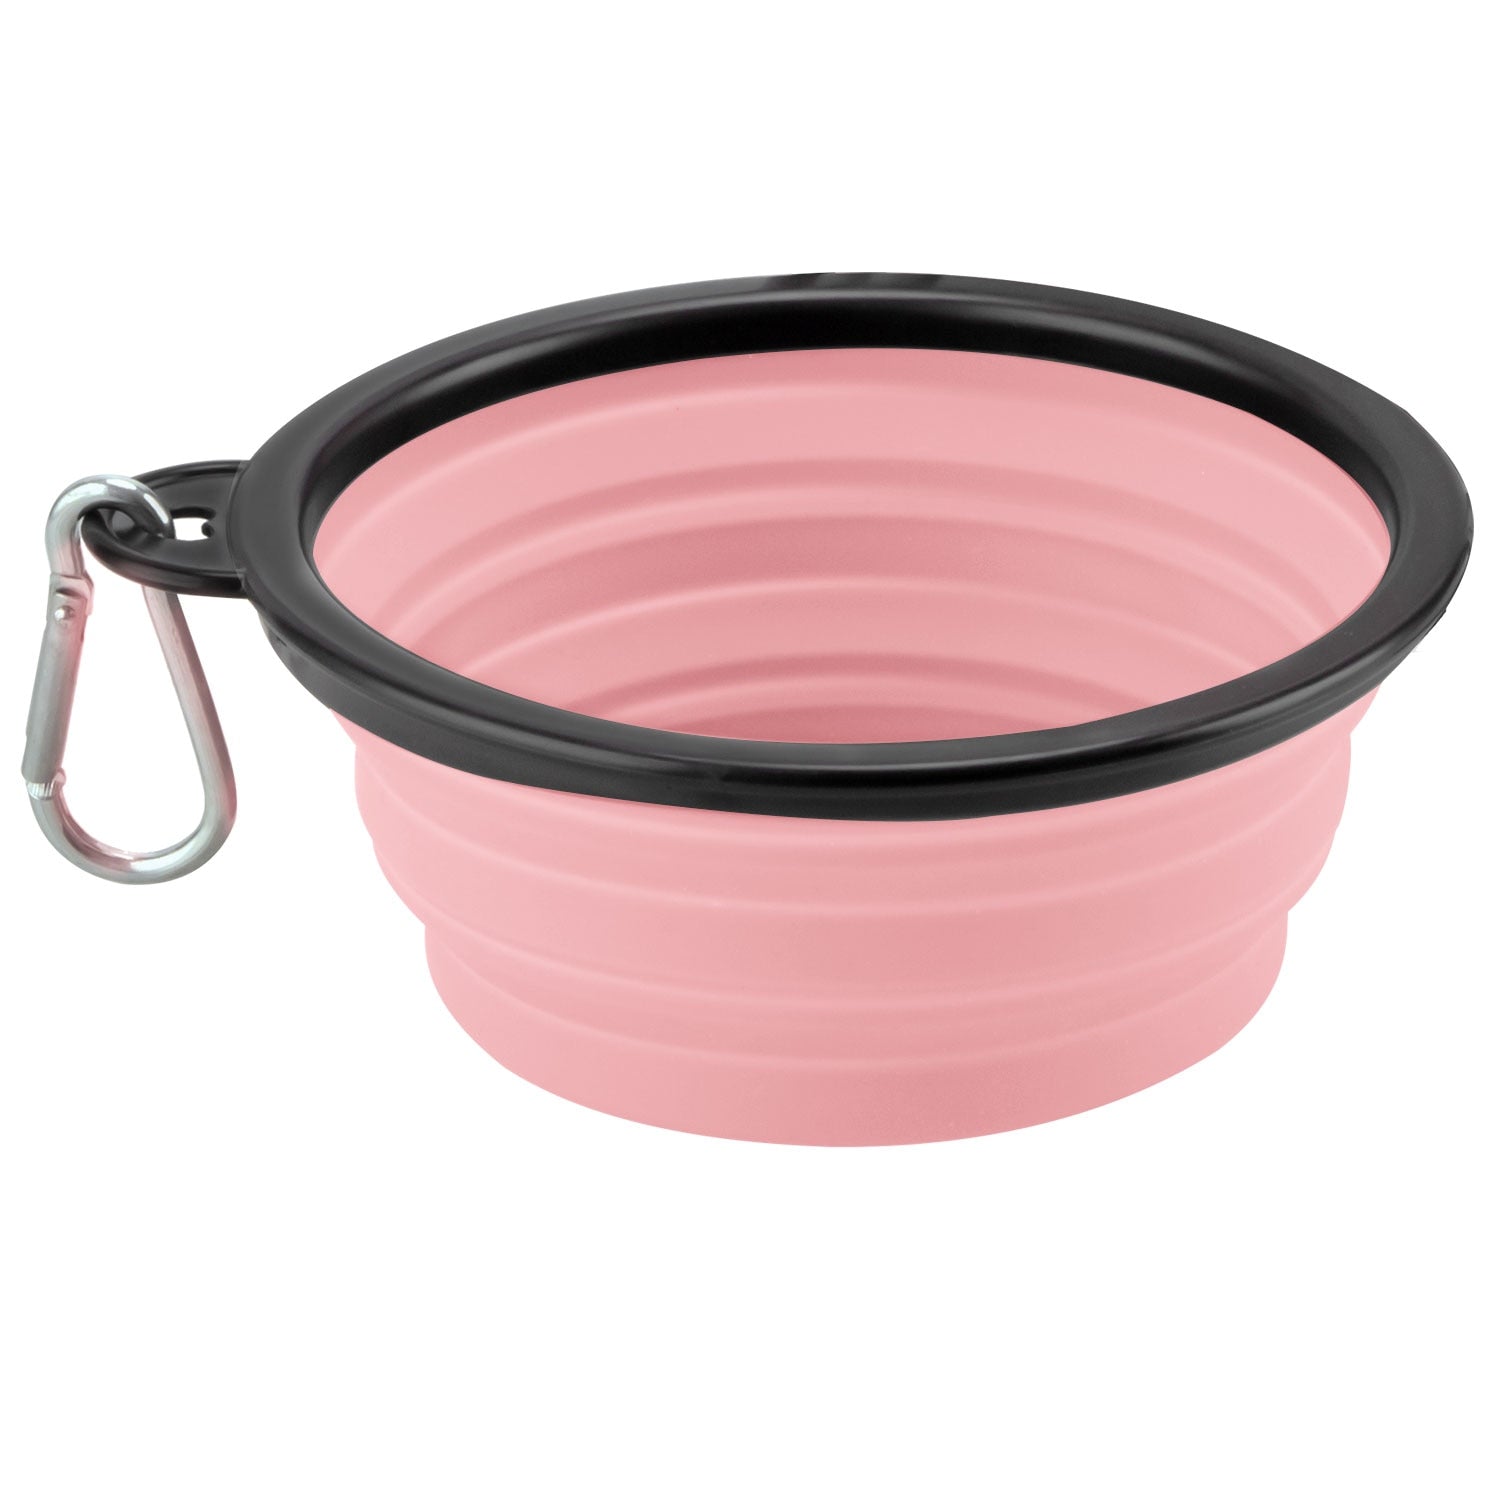 Colapsible Portable Dog Bowl - Pets and More